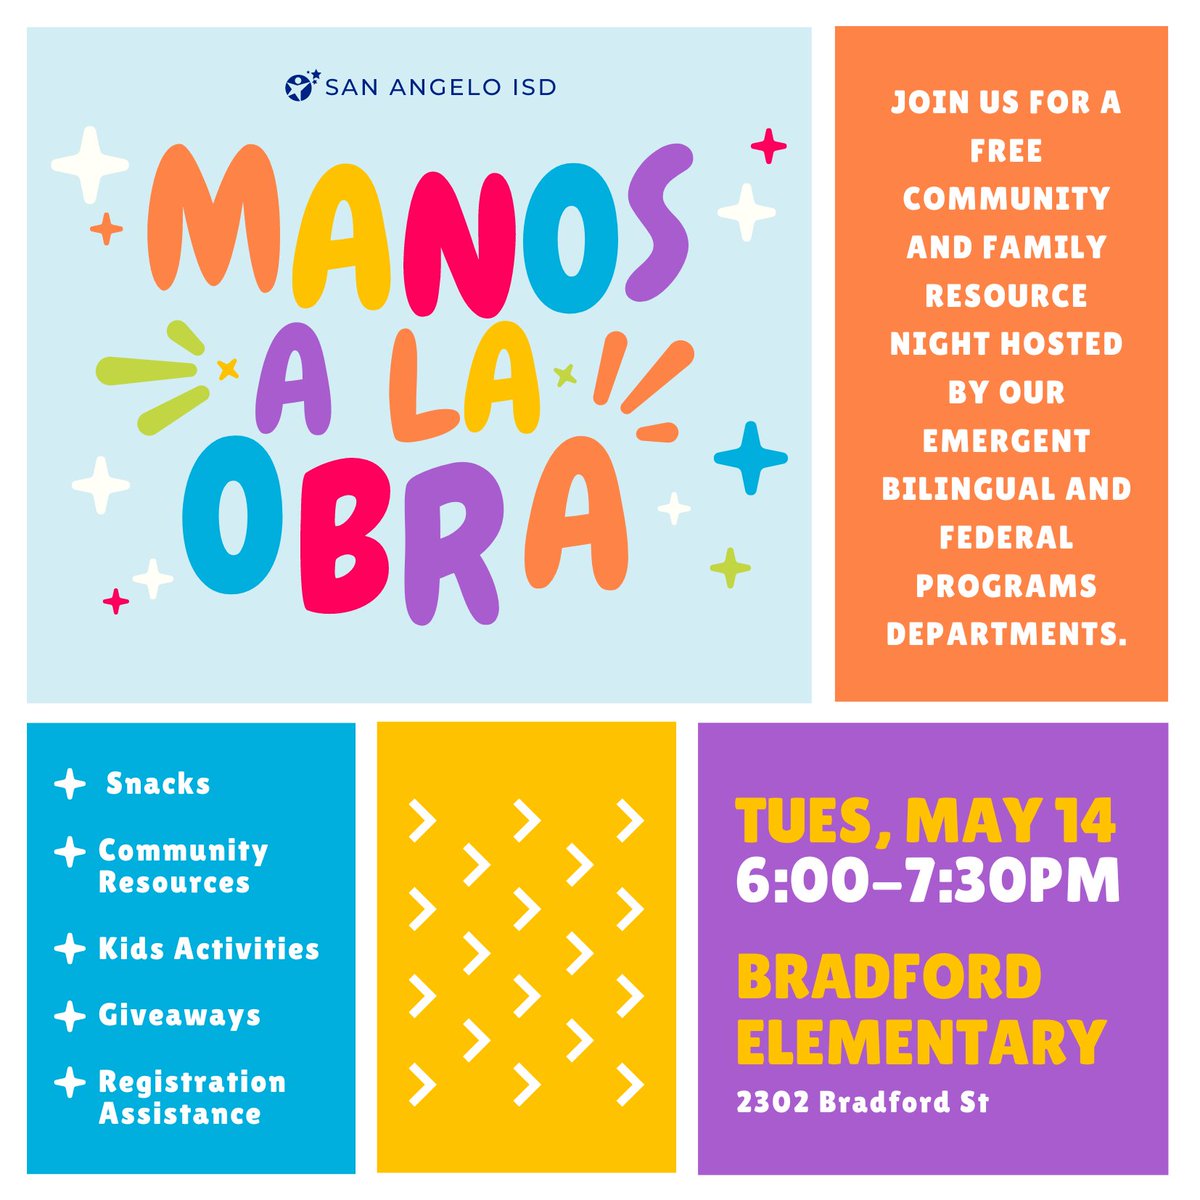 Mark your calendars! Join us for a FREE, family-friendly San Angelo ISD “Manos a la Obra” Community Resource Night on Tuesday, May 14th from 6:00 - 7:30pm at Bradford Elementary located at 2302 Bradford Street, San Angelo, TX 76903. Find out more: saisd.org/news-item/~boa…